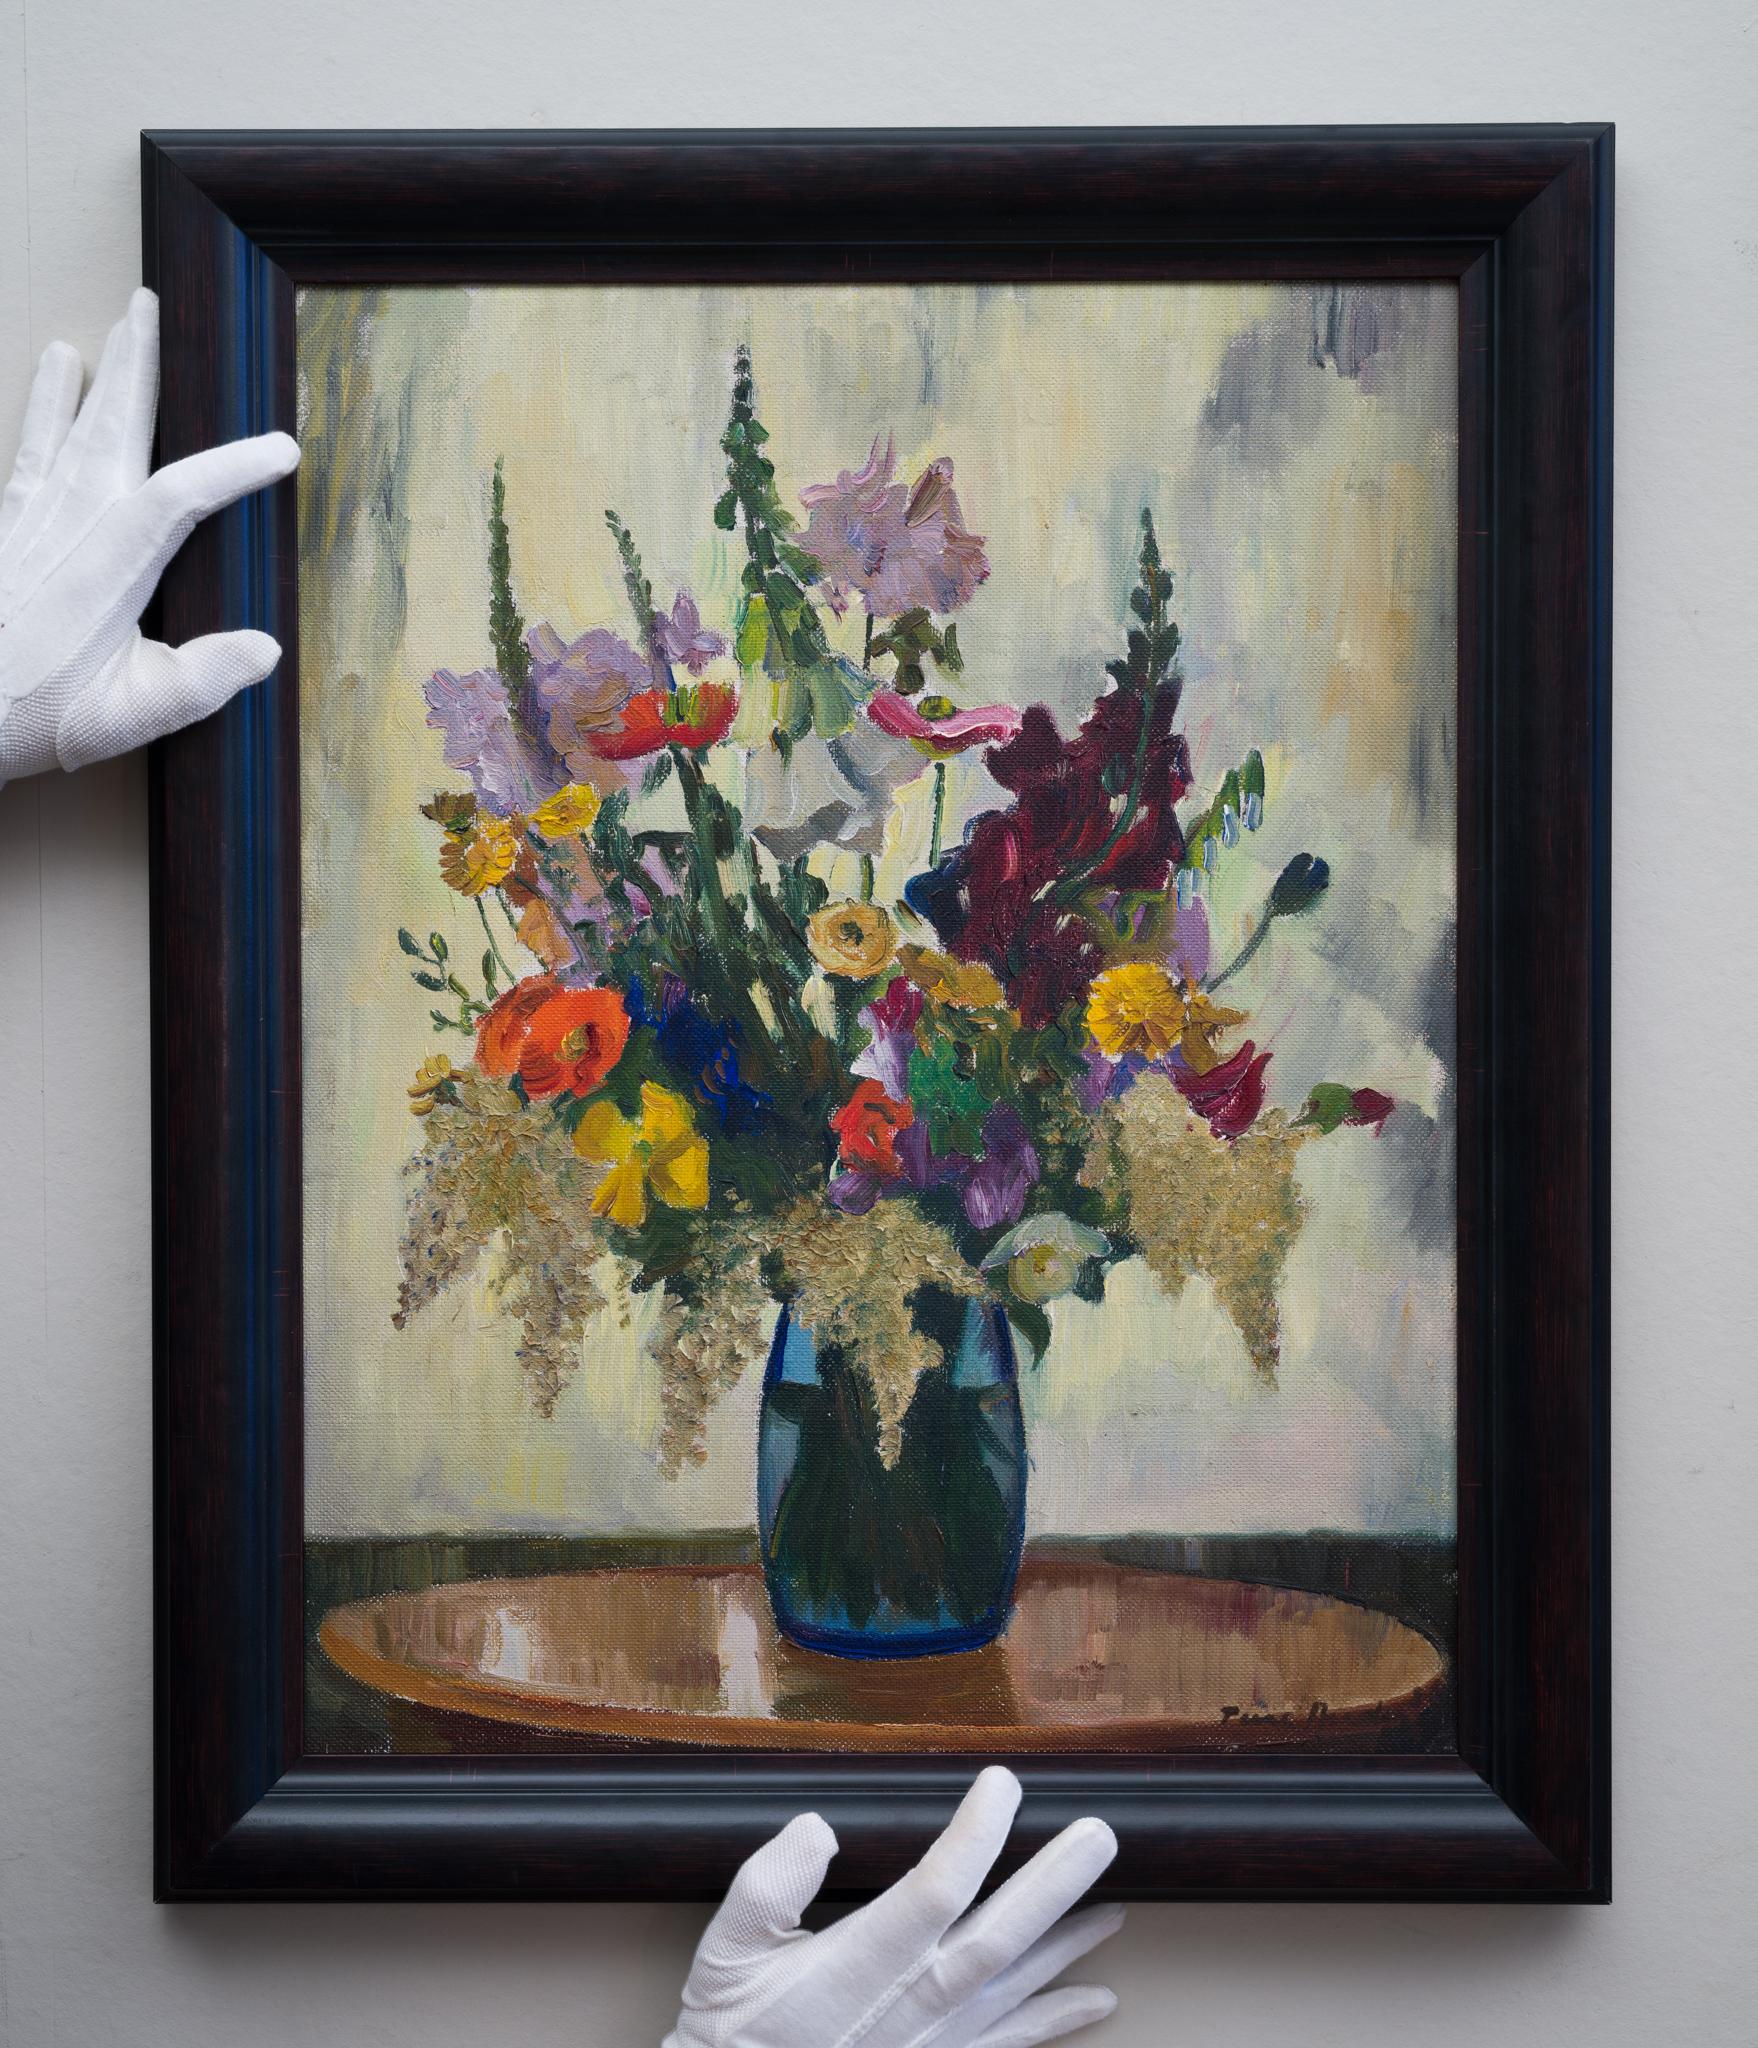 A Bouquet of Digitalis, Poppy, Iris, Snapdragons, Cornflower, Buttercup, 1936 - Modern Painting by Ture Ander